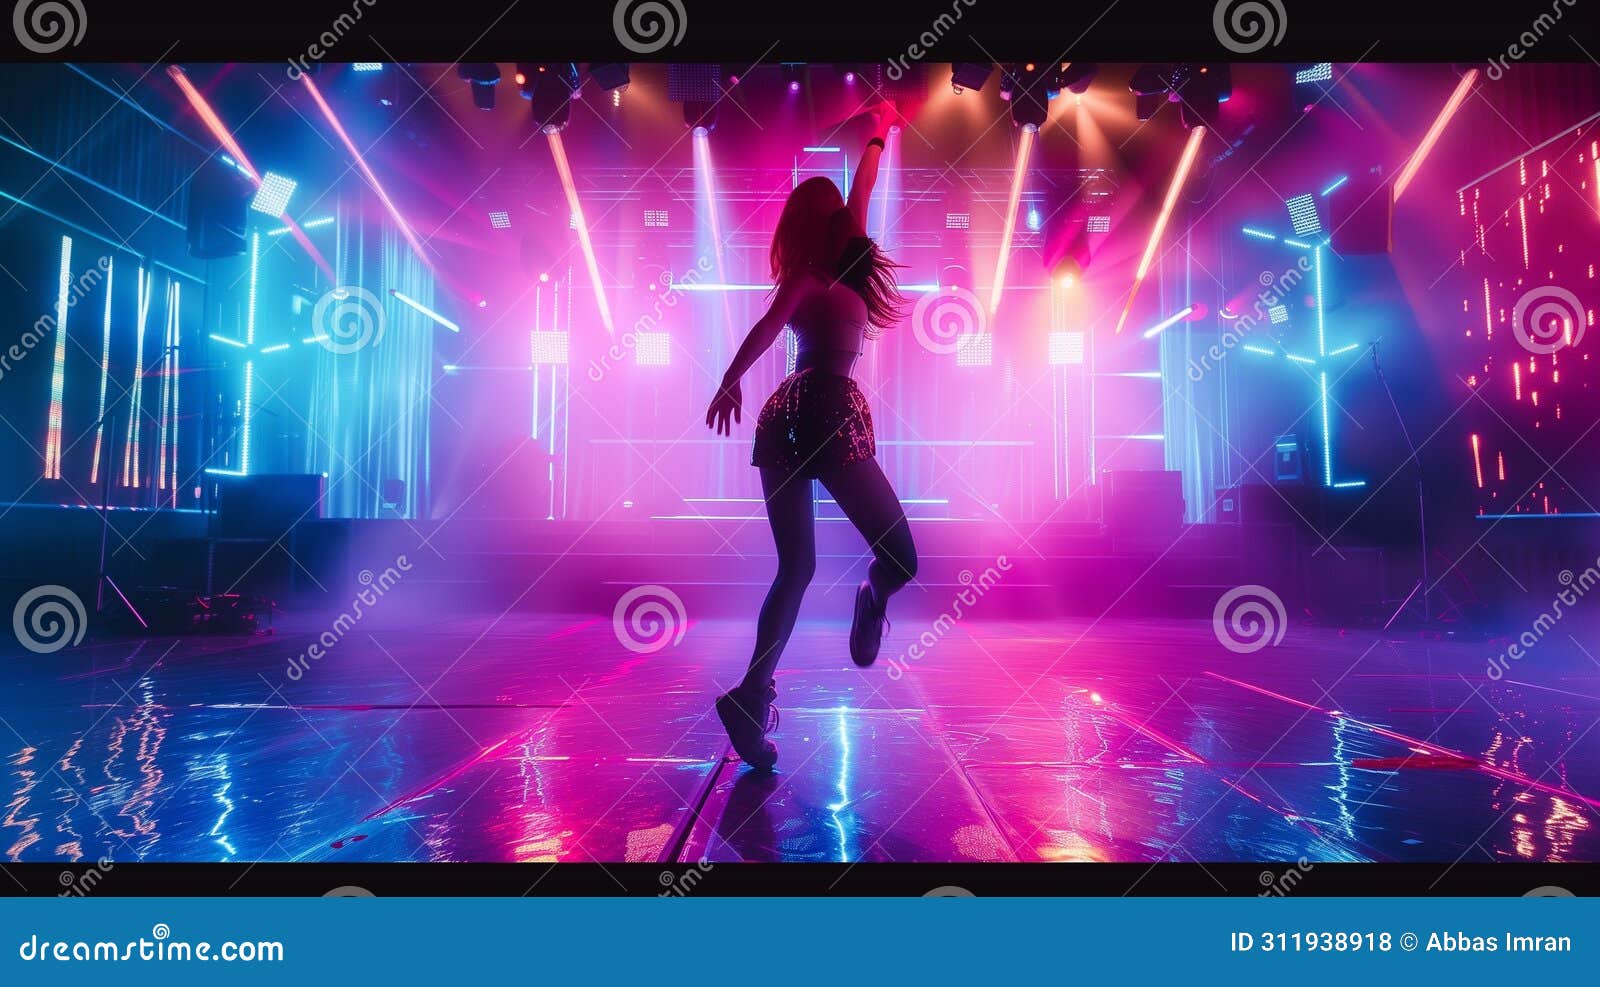 a dancer girl dance on a stage with music,